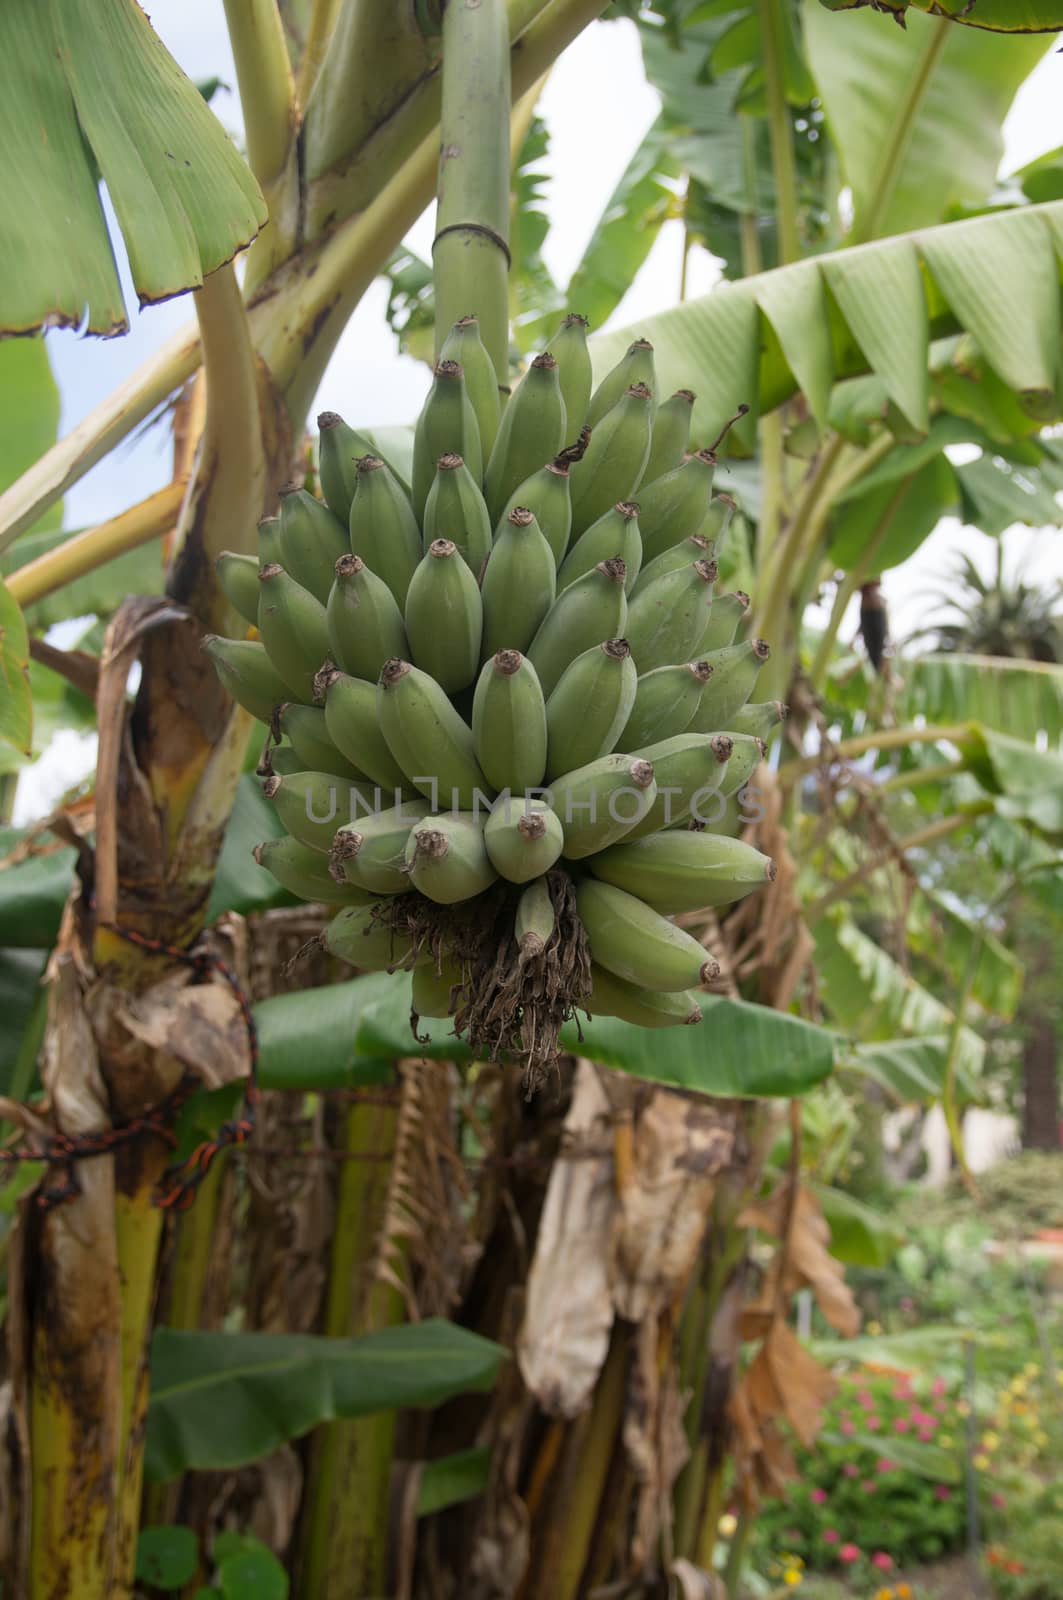 Bananas in a bunch on tree